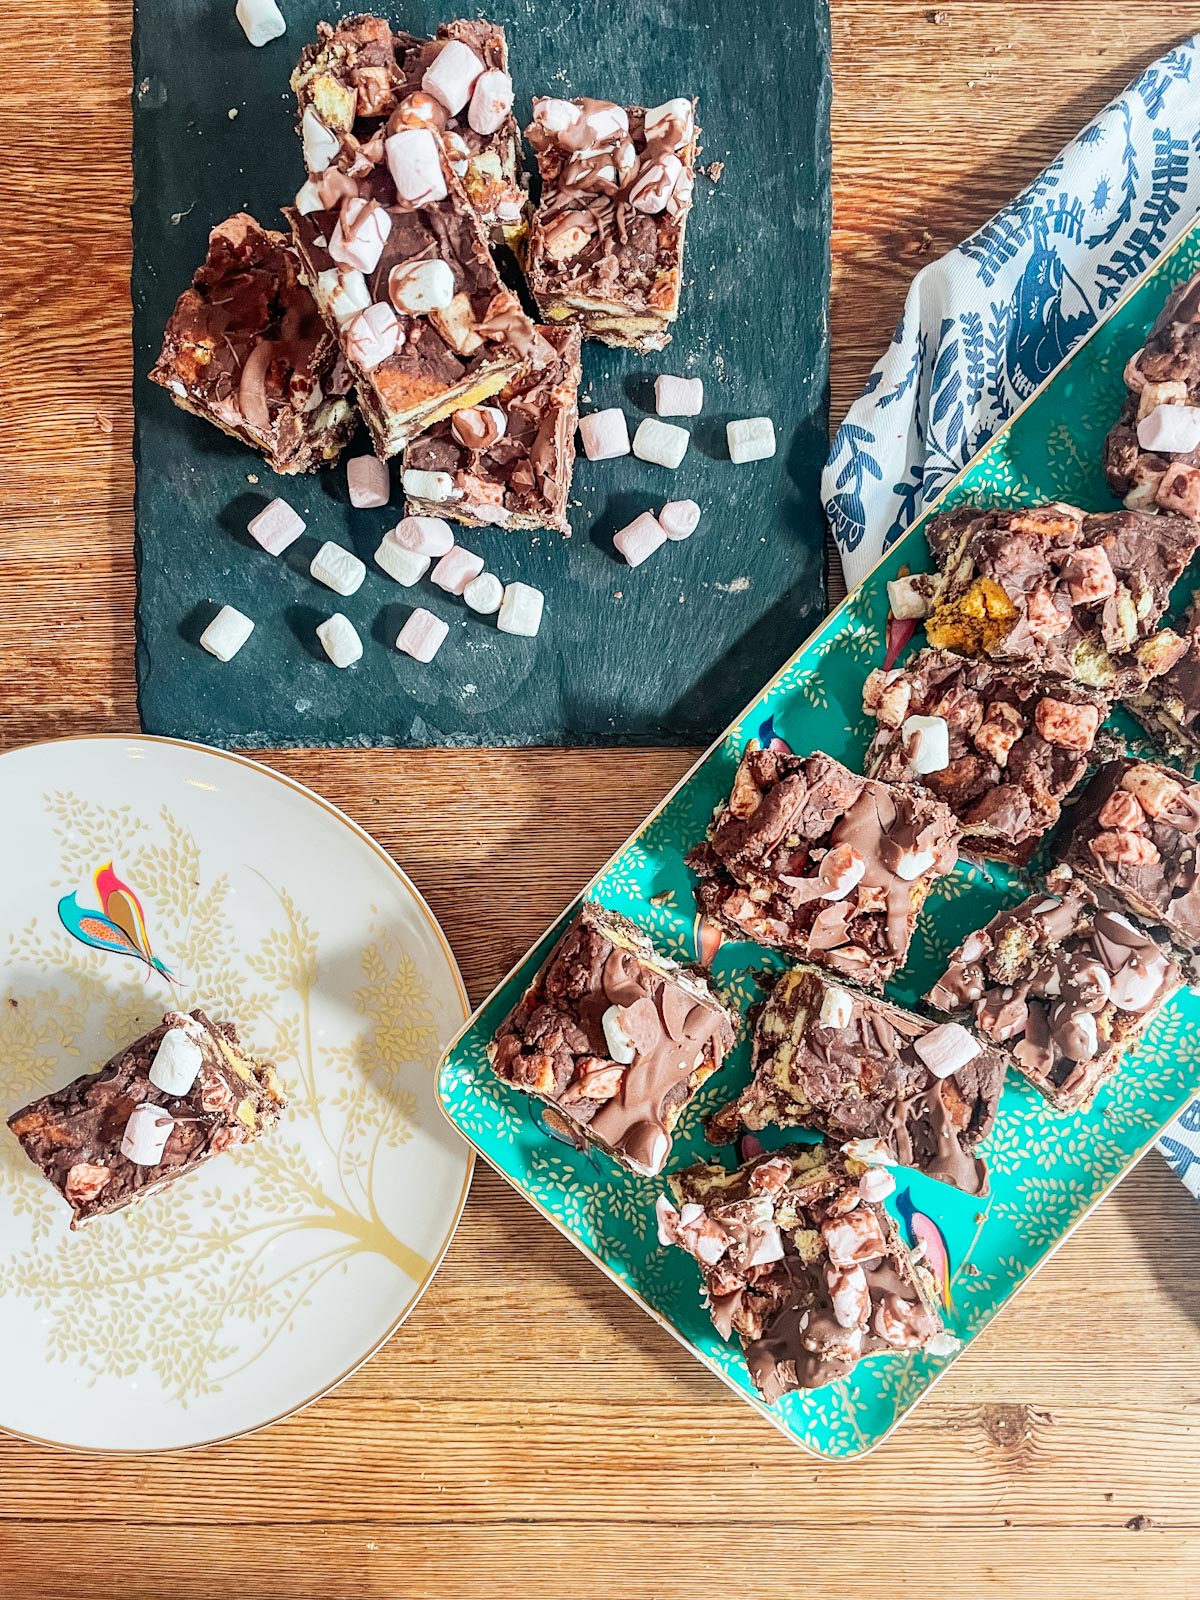 How to make Crunchie Rocky Road